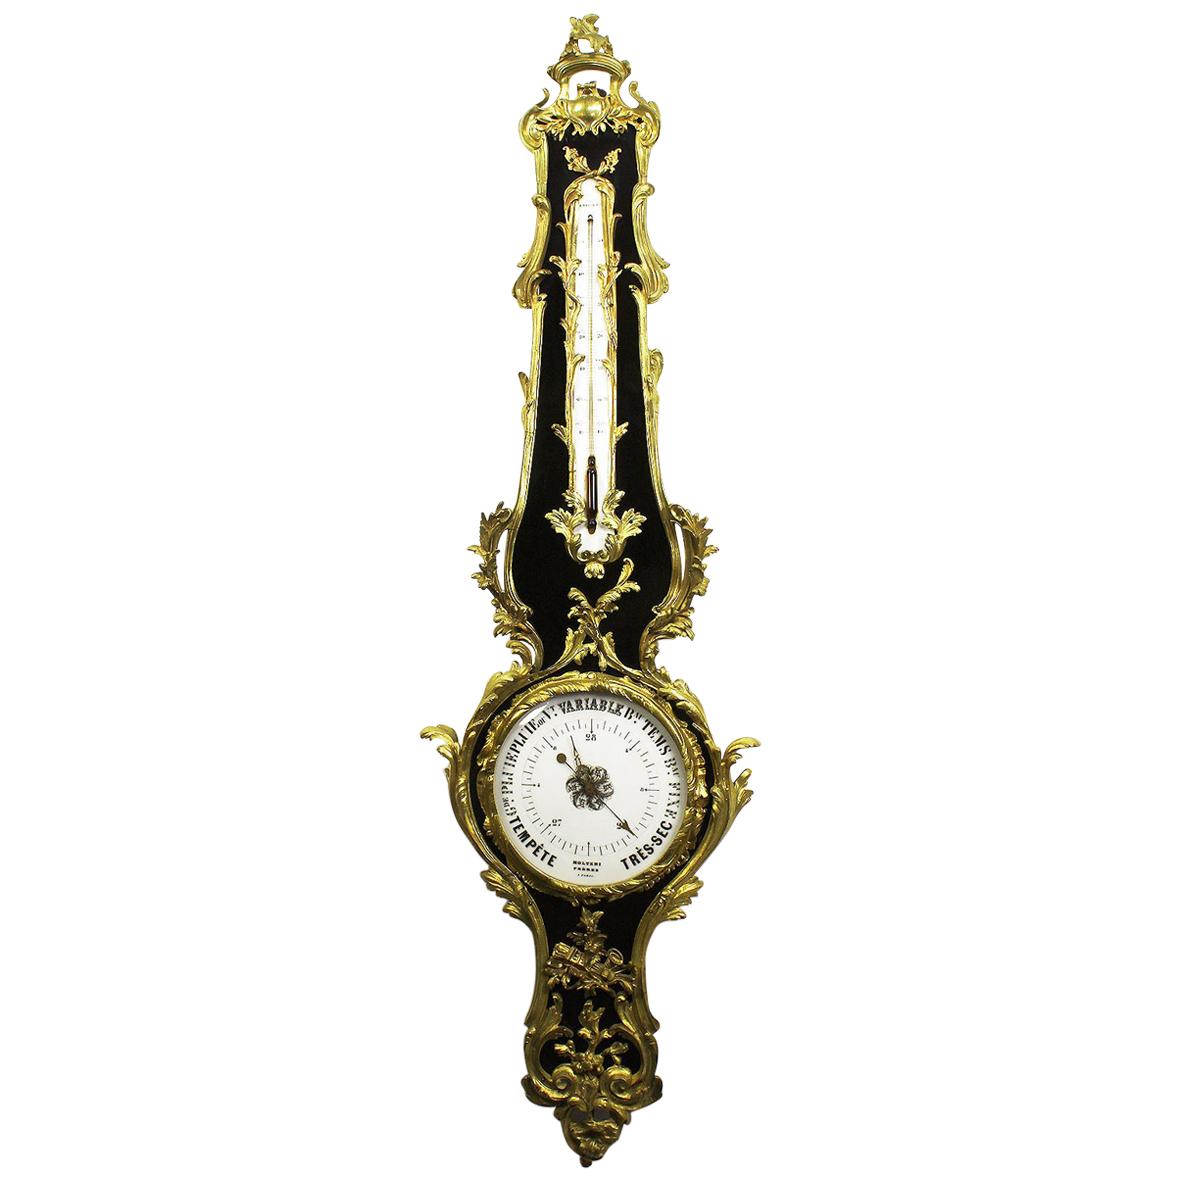 French 19th Century Louis XV Style Gilt-Bronze and Ebonized Wood Wall Barometer